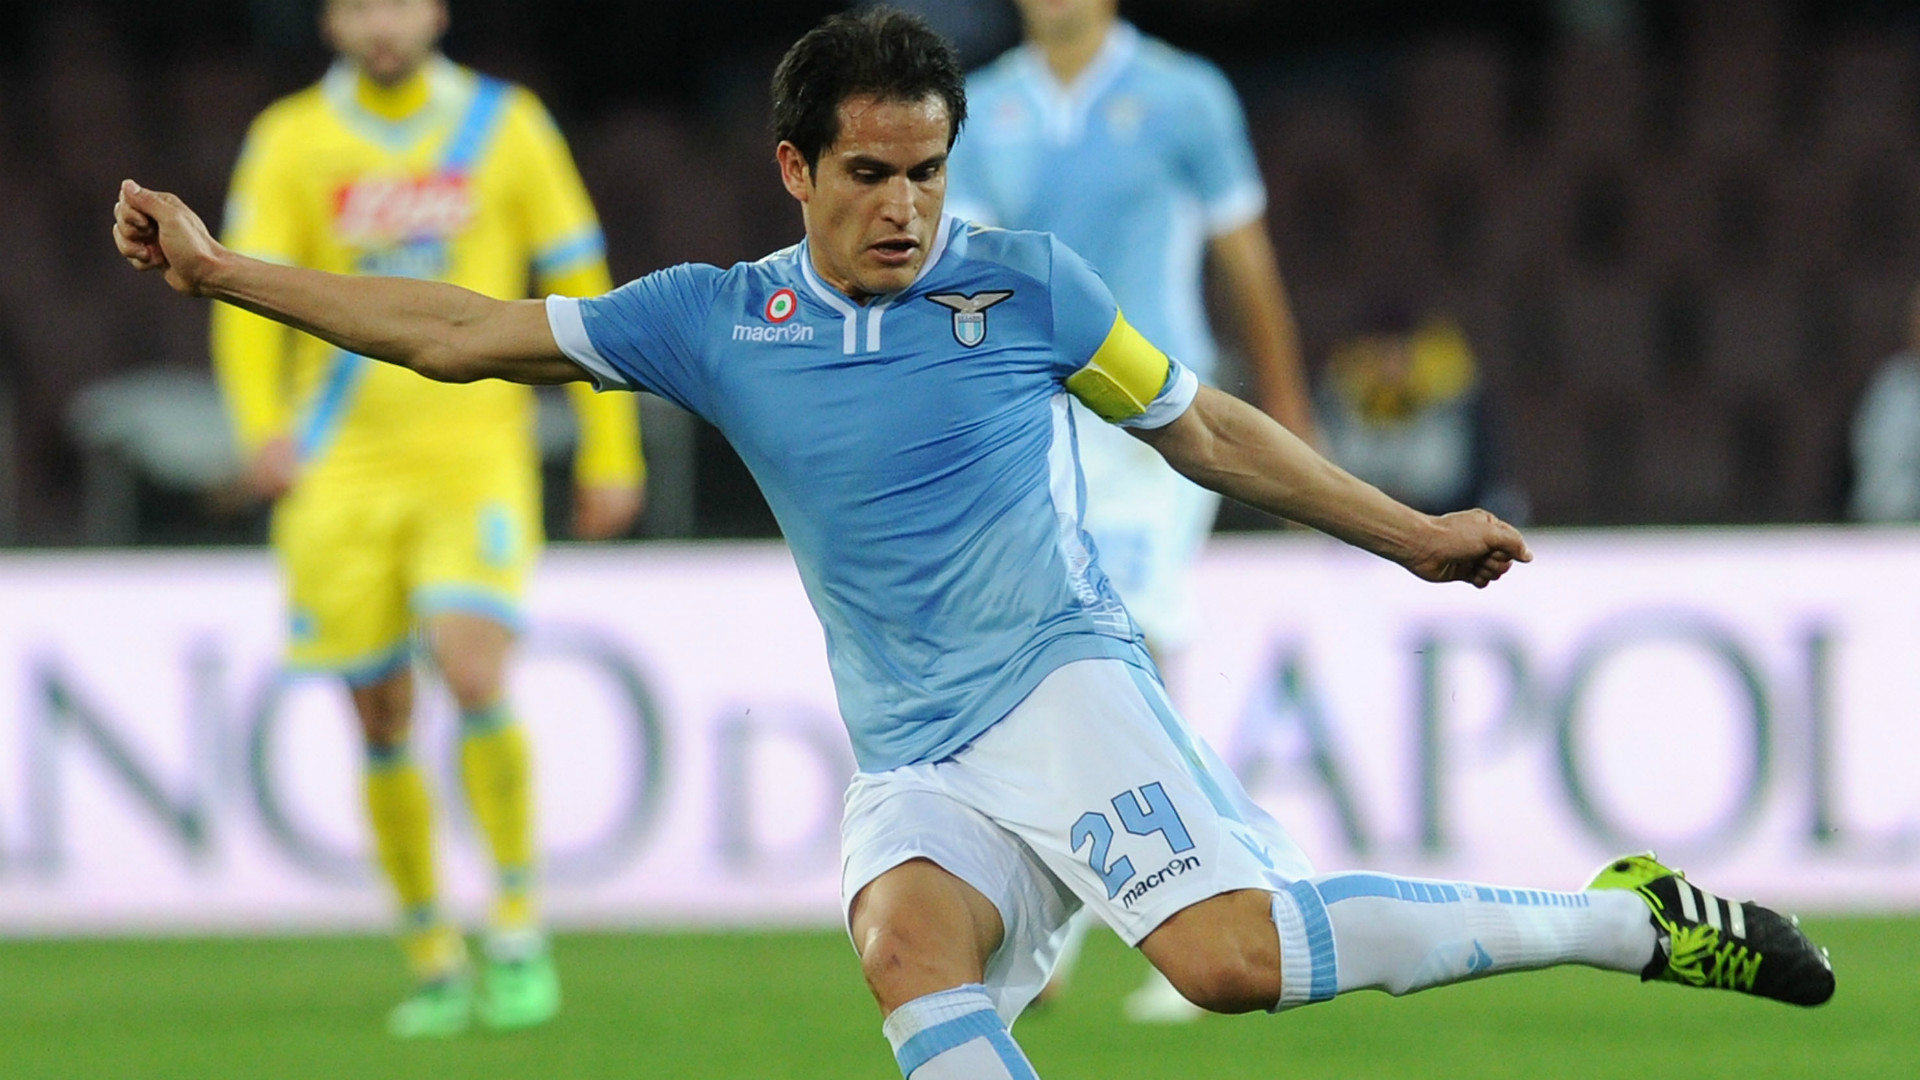 Ex-Lazio Midfielder Cristian Ledesma: “Simone Inzaghi Has Left His Mark On Inter & The Players Have Made The Difference”